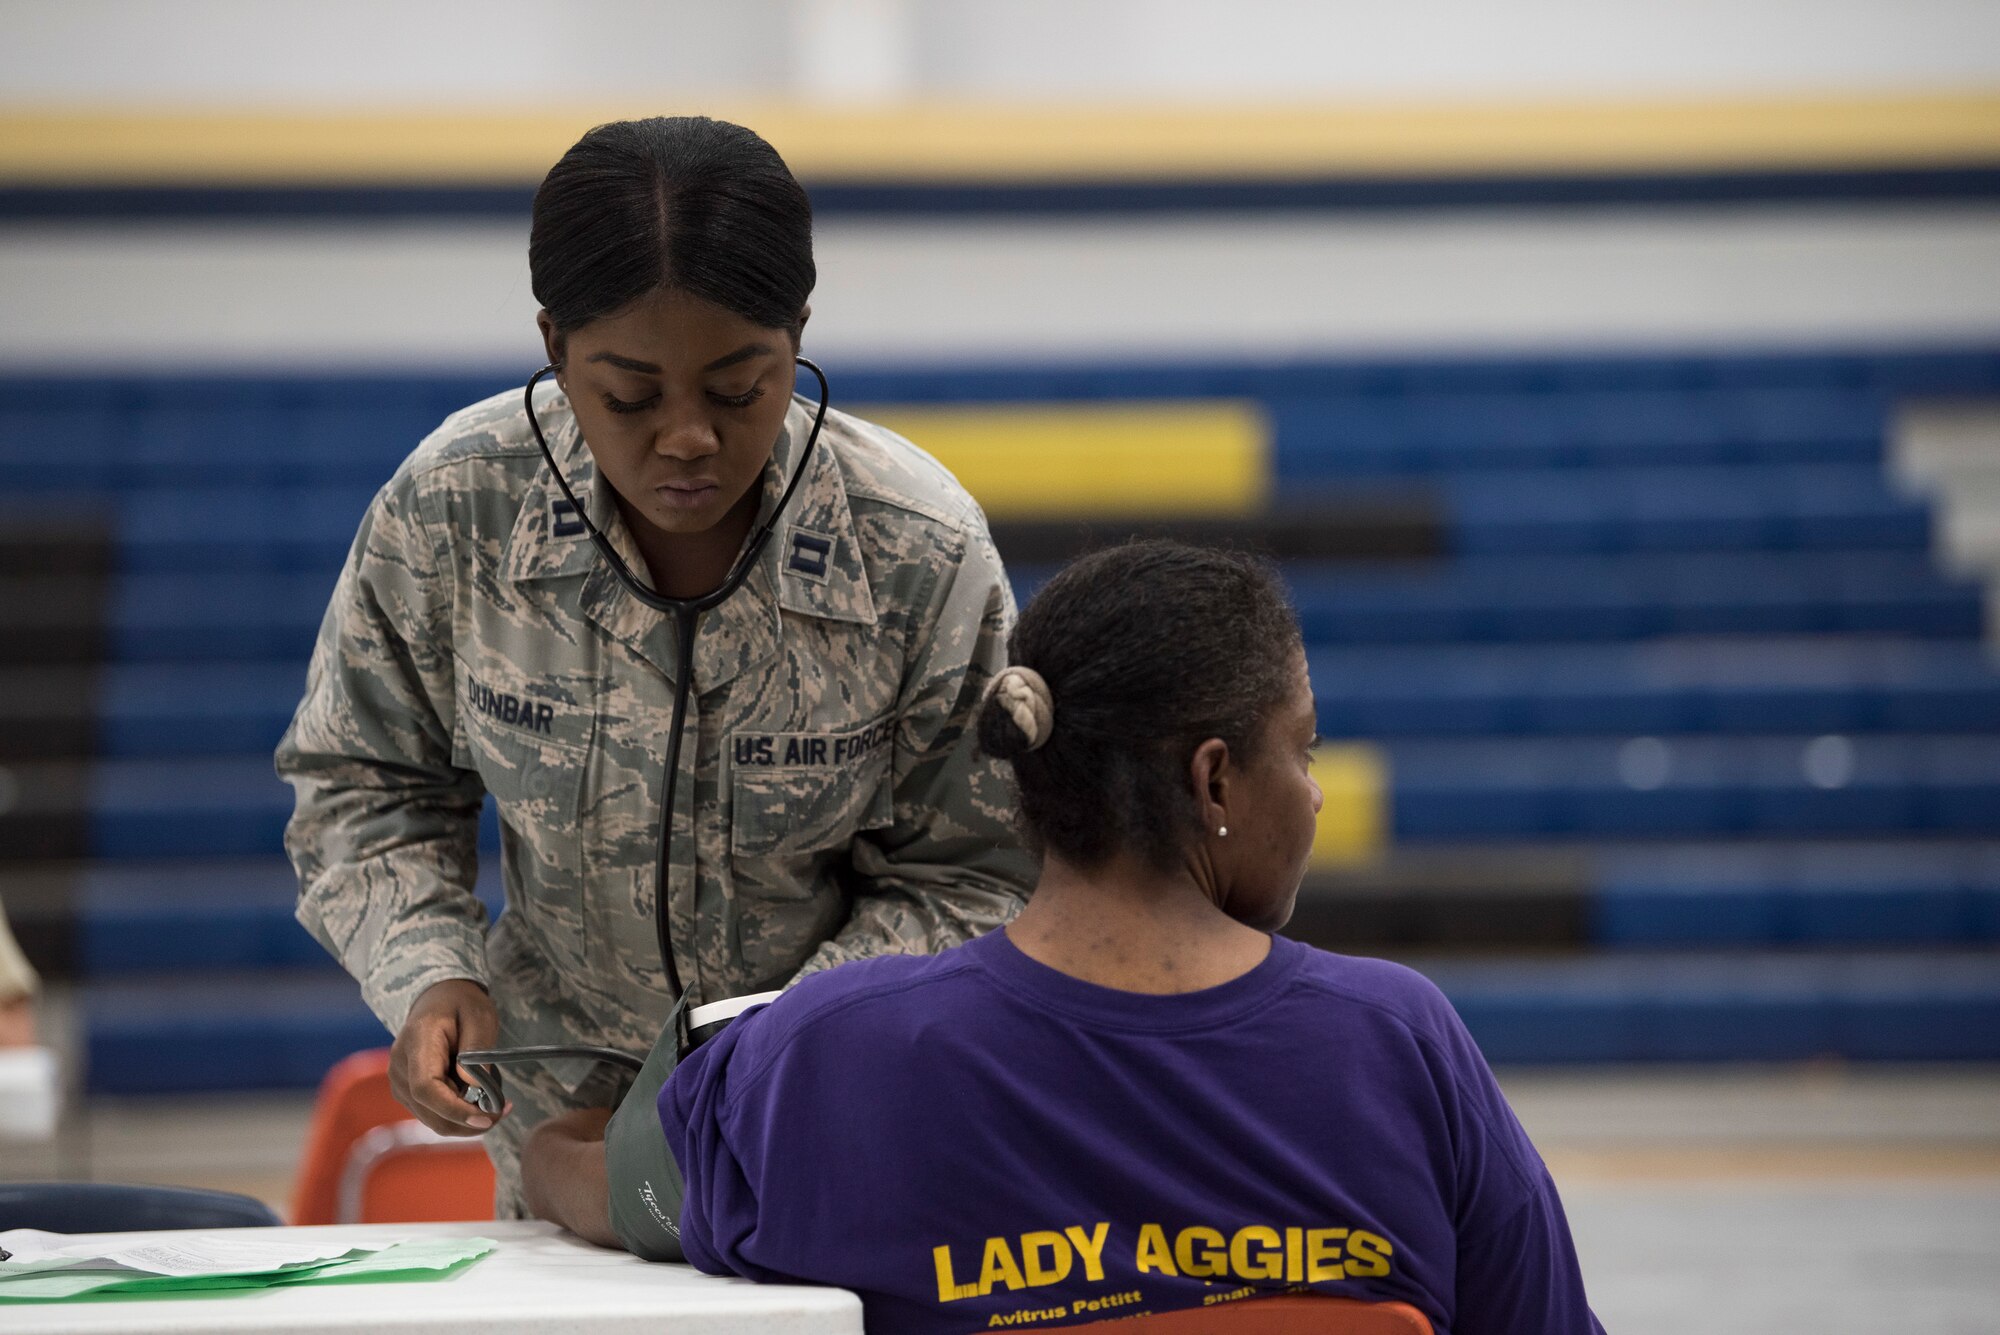 Capt. Nikita Dunbar, an Air National Guard critical-care nurse from the 187th Fighter Wing CERFP in Montgomery, Ala., takes a patient's blood pressure at the Alabama Wellness Innovative Readiness Training at Monroe County High School in Monroeville, Ala., June 3, 2018. Air Guardsmen from Alabama and Wisconsin were part of the joint force participating in the two-week training that provided no-cost health care to the citizens of lower Alabama. (US Air National Guard photo by Staff Sgt. Jared Rand)